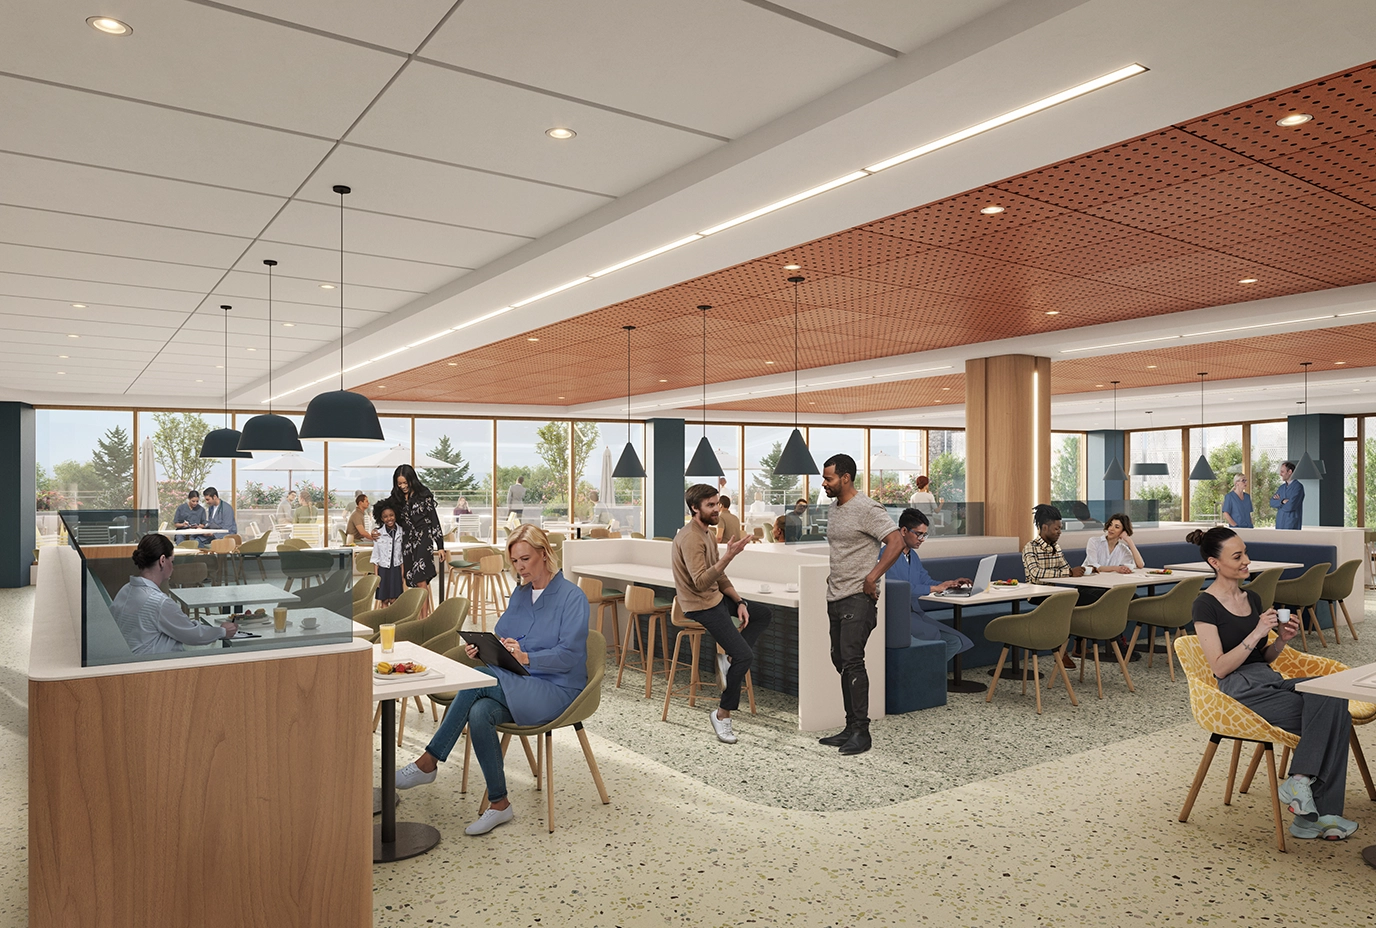 Rendering of the new dining area of the patient tower